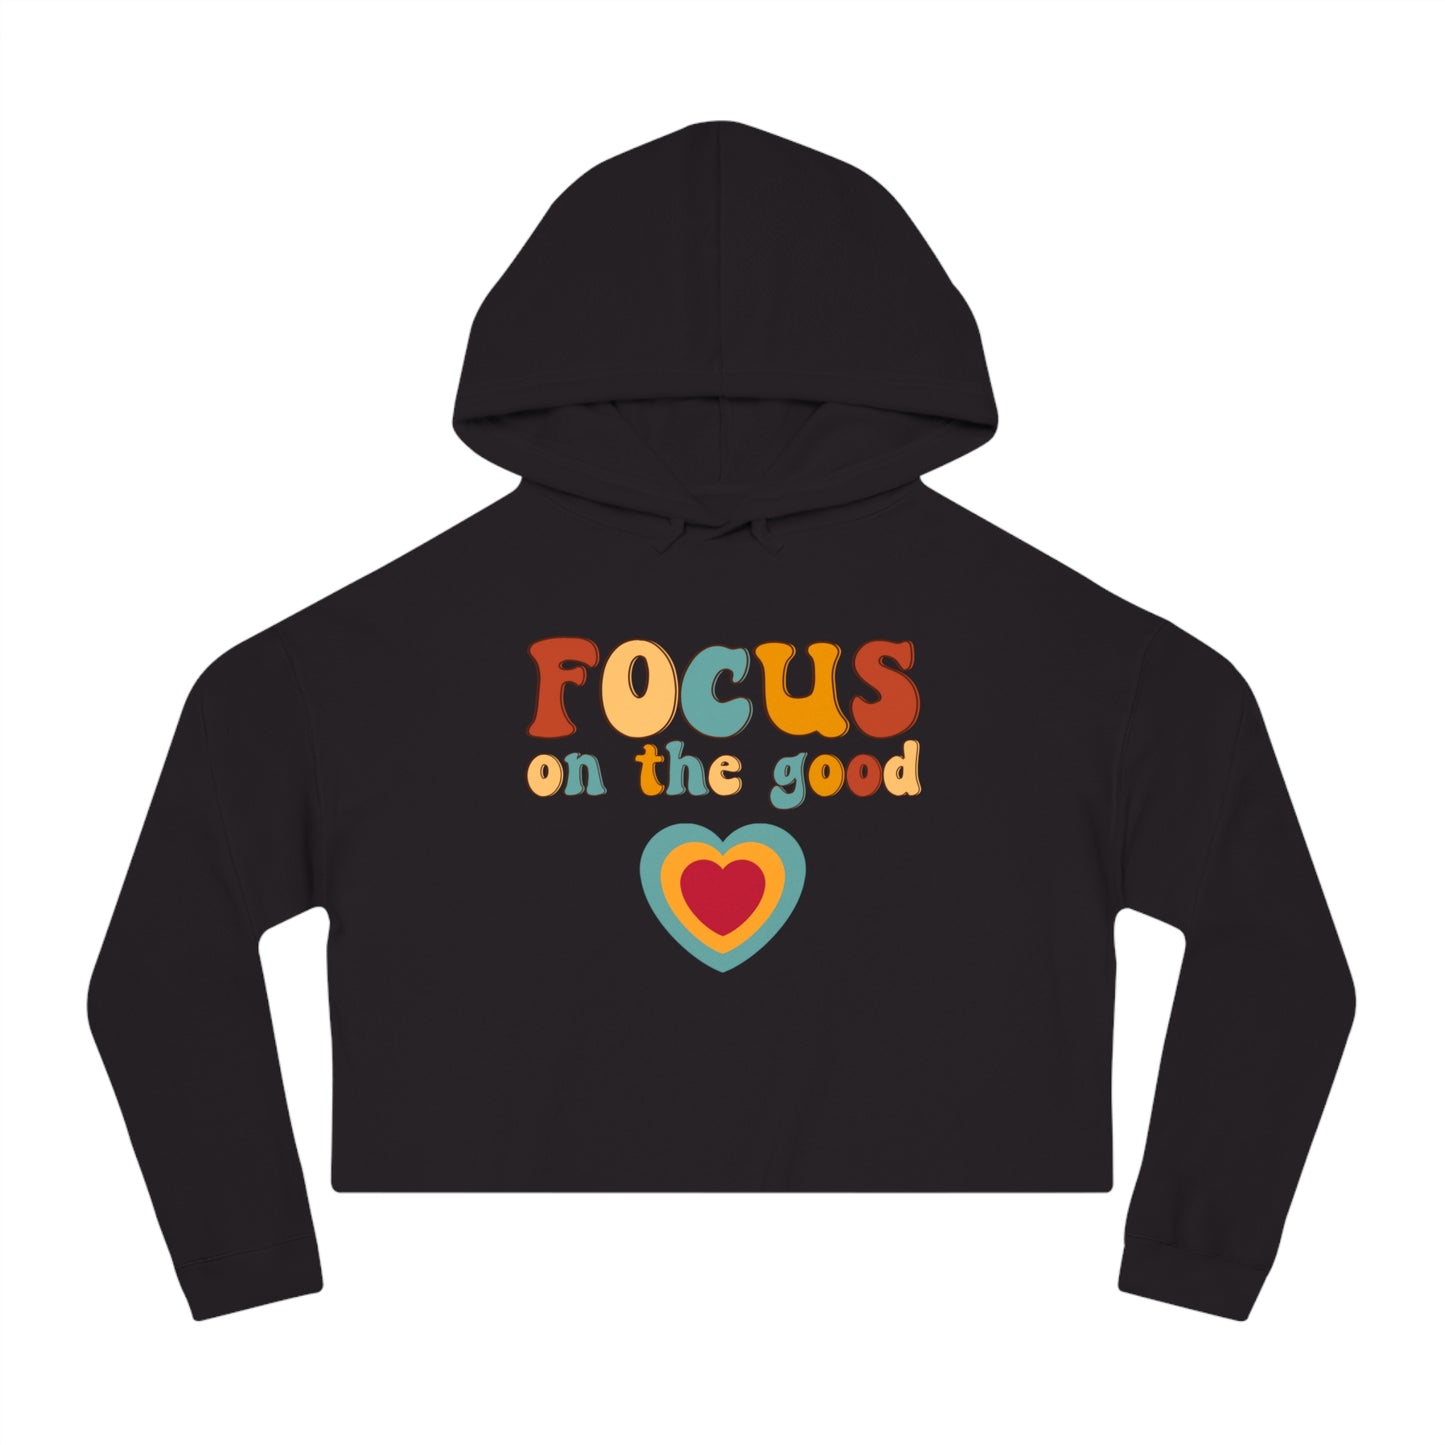 Colorful “Focus on the good” with a heart message design on this stylish Women’s Cropped Hooded Sweatshirt for your enjoyment.